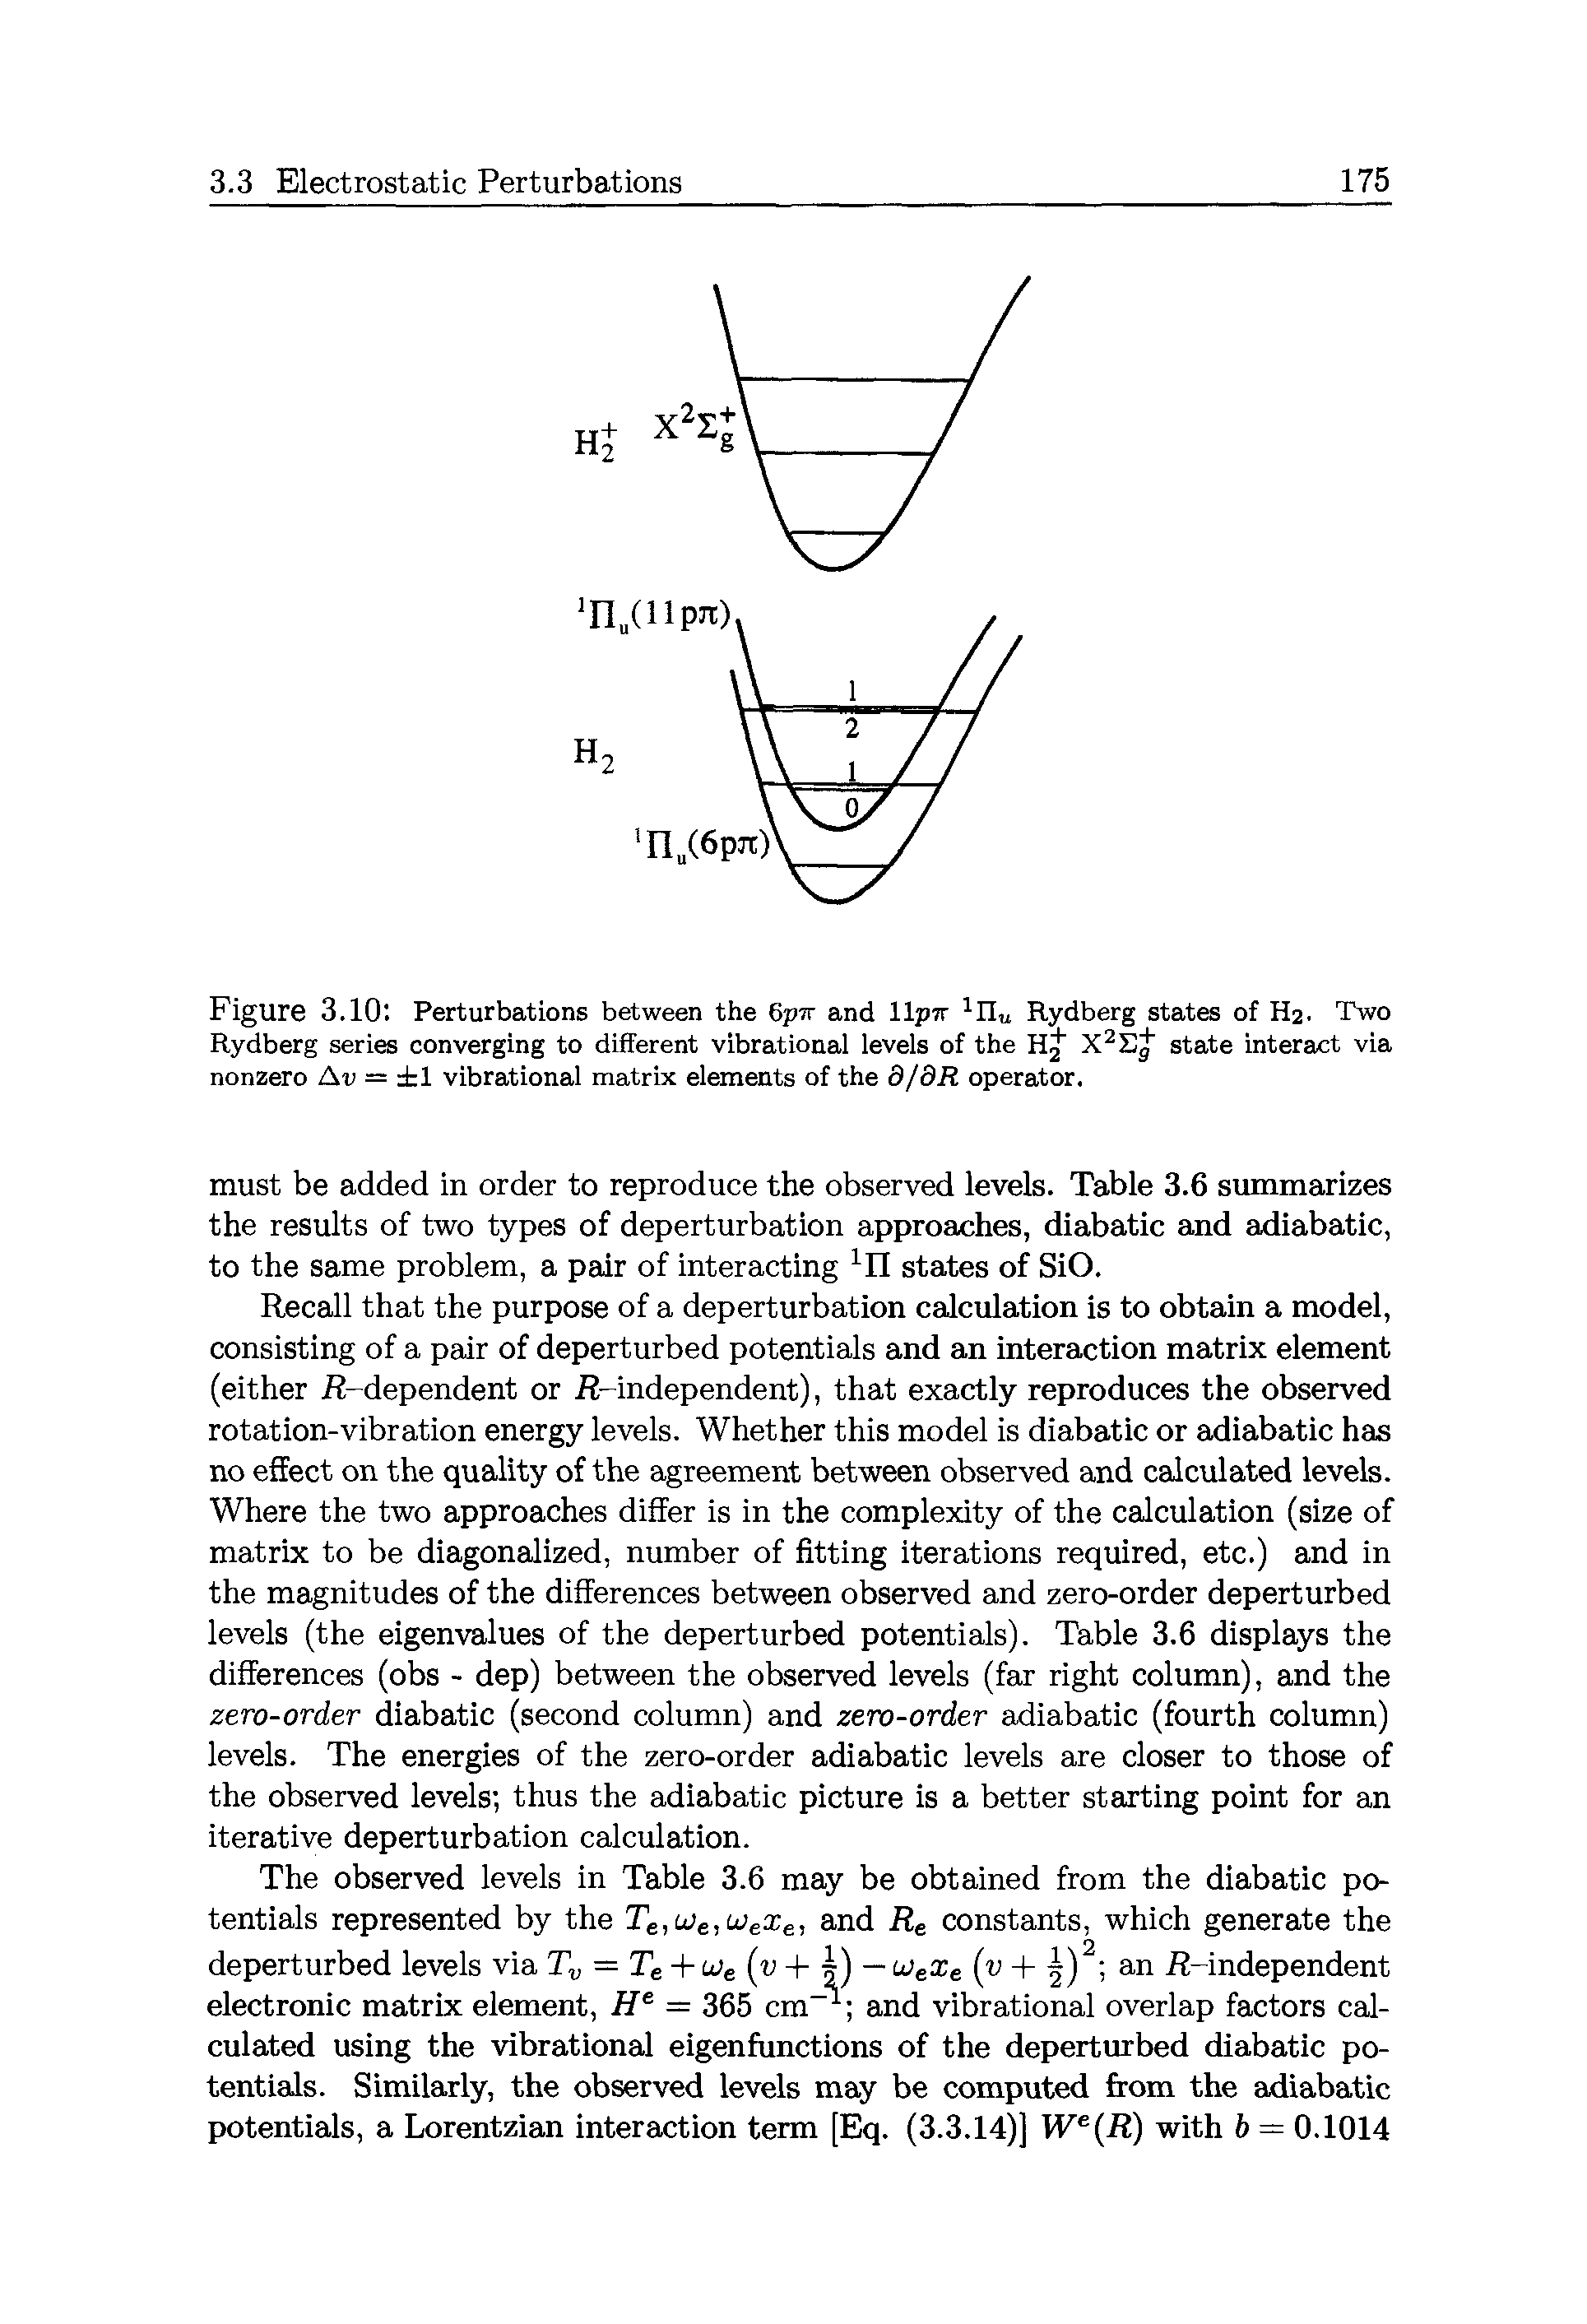 Figure 3.10 Perturbations between the 6pw and llj>7r 1n Rydberg states of H2. Two Rydberg series converging to different vibrational levels of the X2E state interact via nonzero Av — 1 vibrational matrix elements of the d/dR operator.